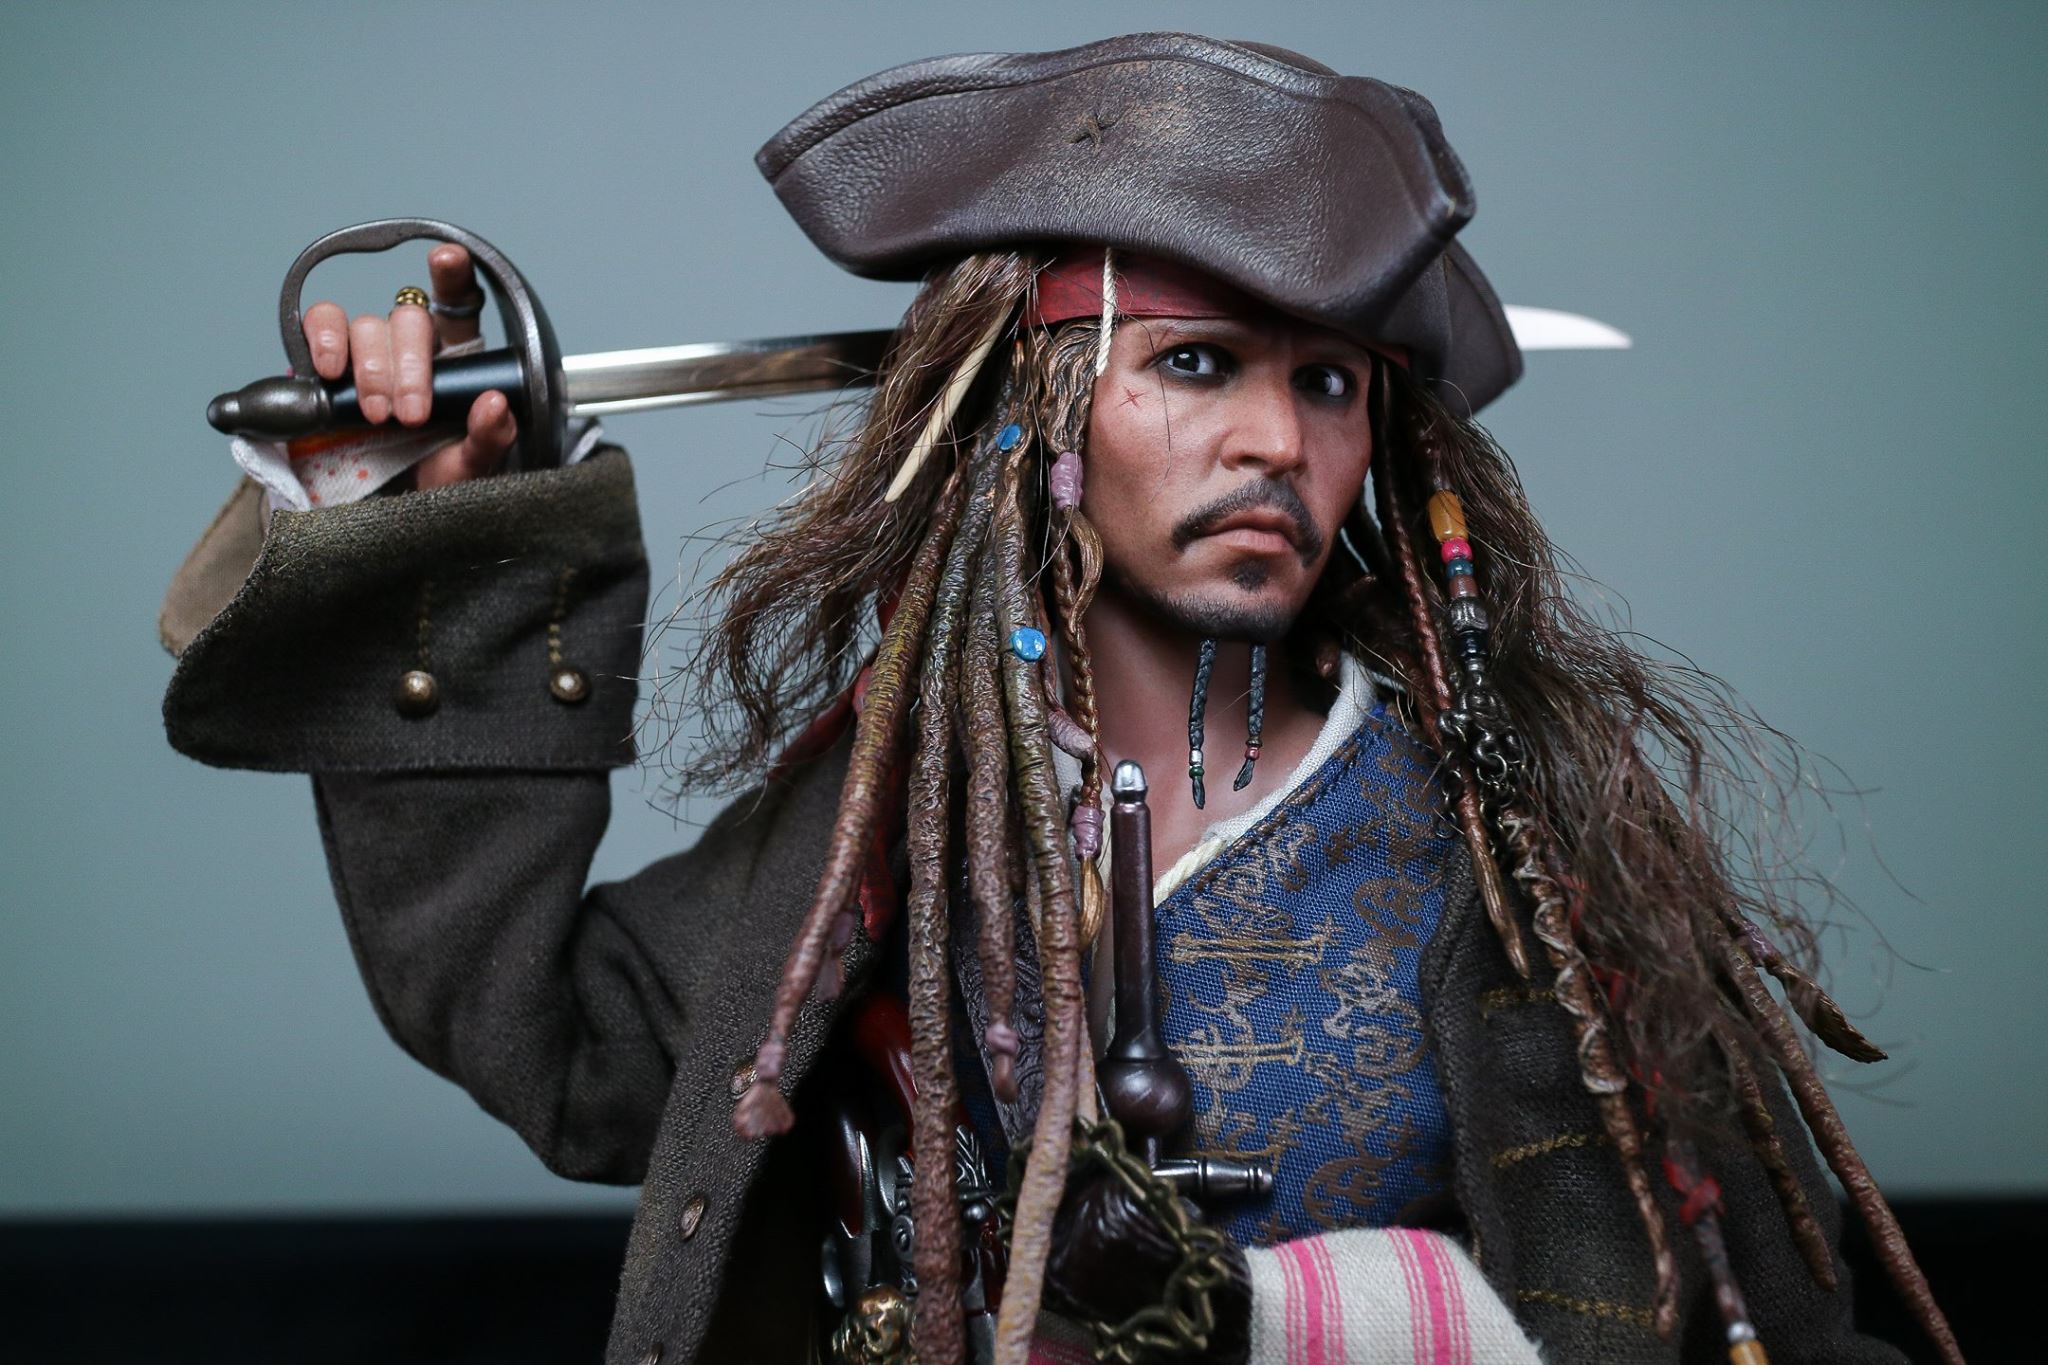 Jack Sparrow 1/6 - Pirates of the Caribbean : Dead Men Tell No Tales (Hot Toys) RTKc2Hwd_o